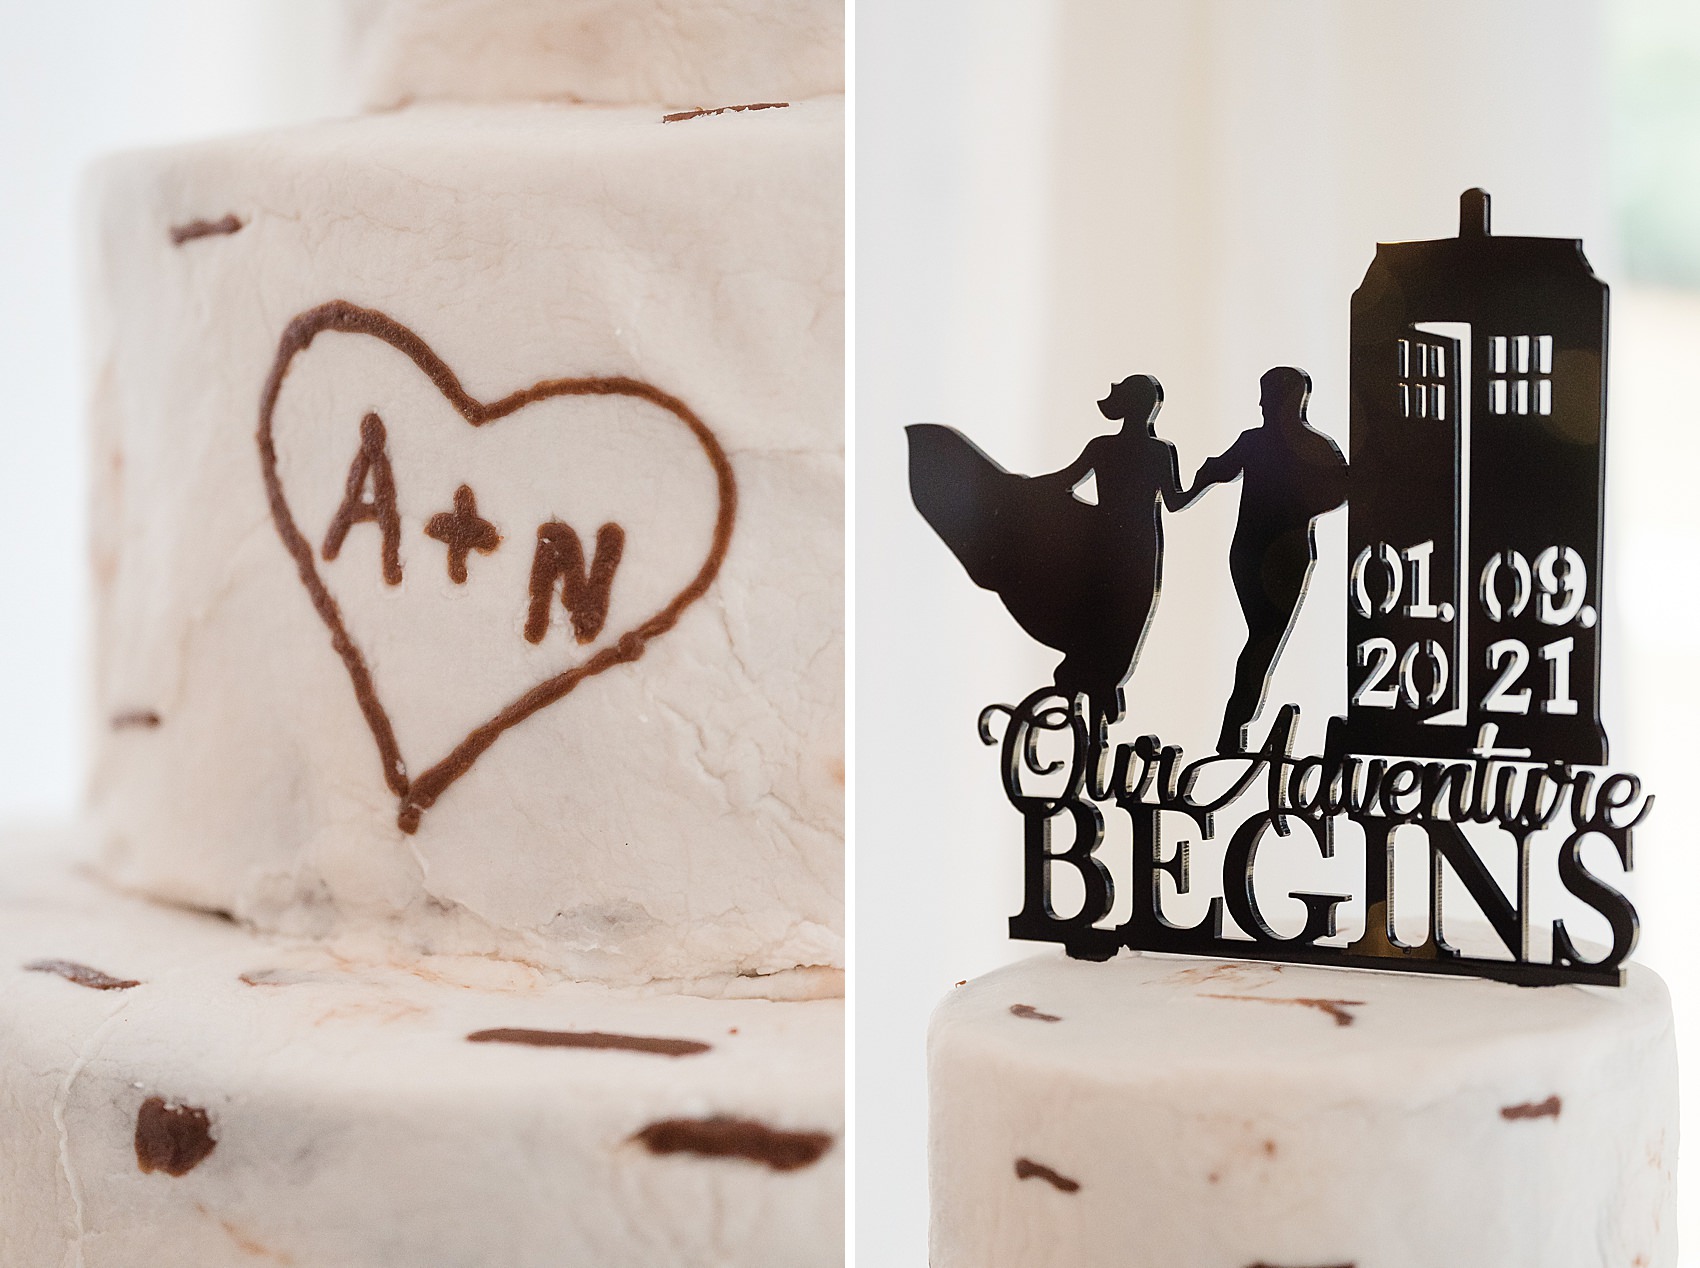 wedding cake doctor who topper